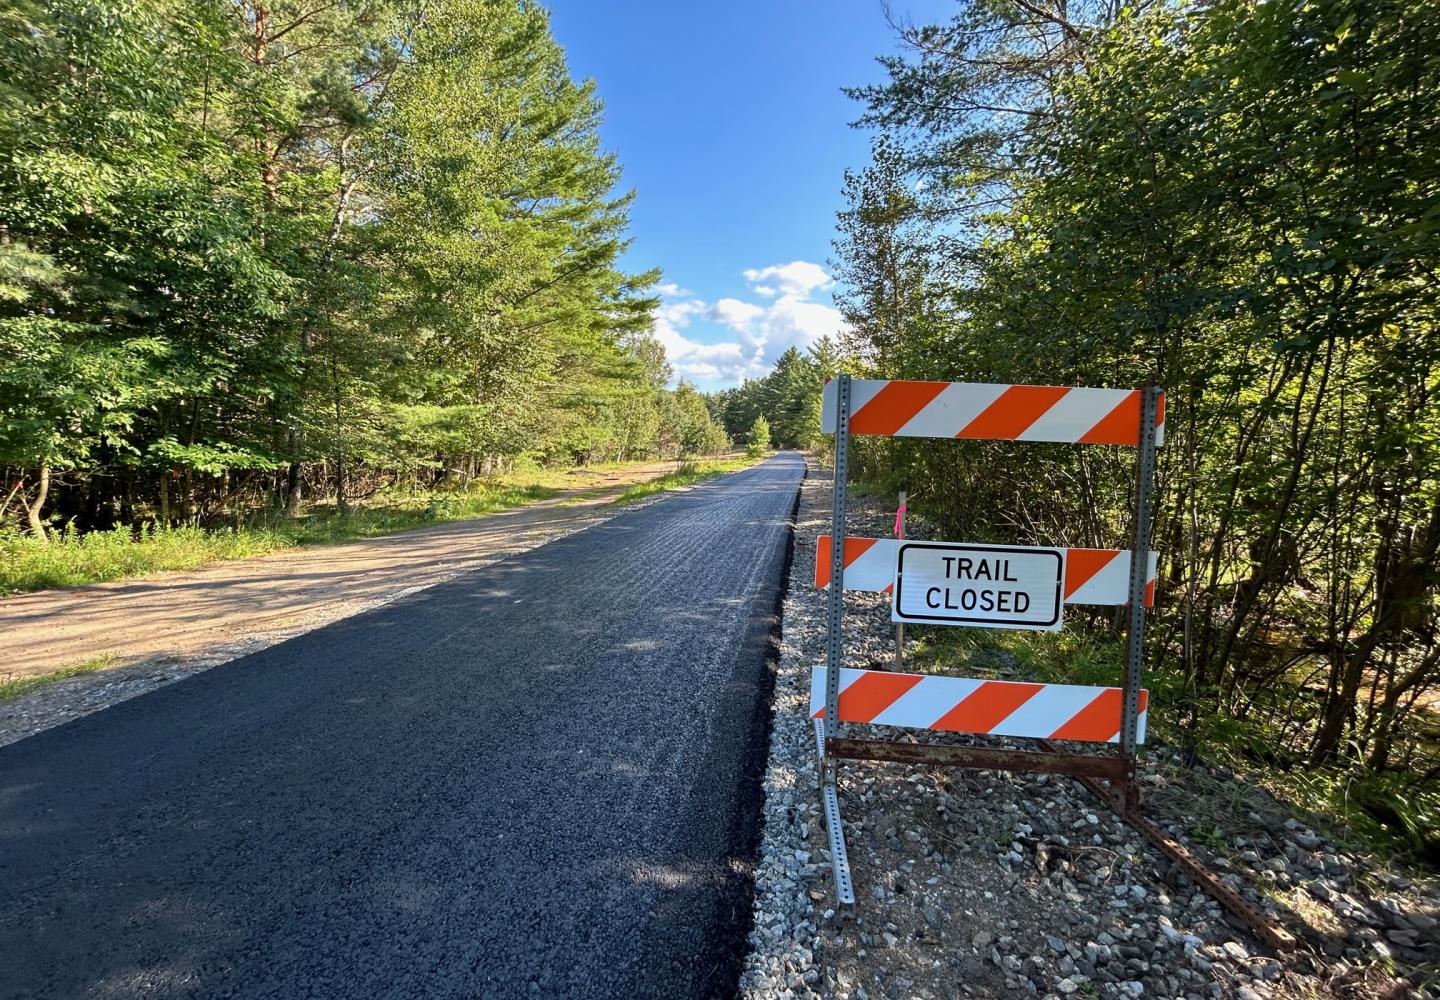 The Adirondack Rail Trail remains closed as construction continues on Phases 1 & 2.